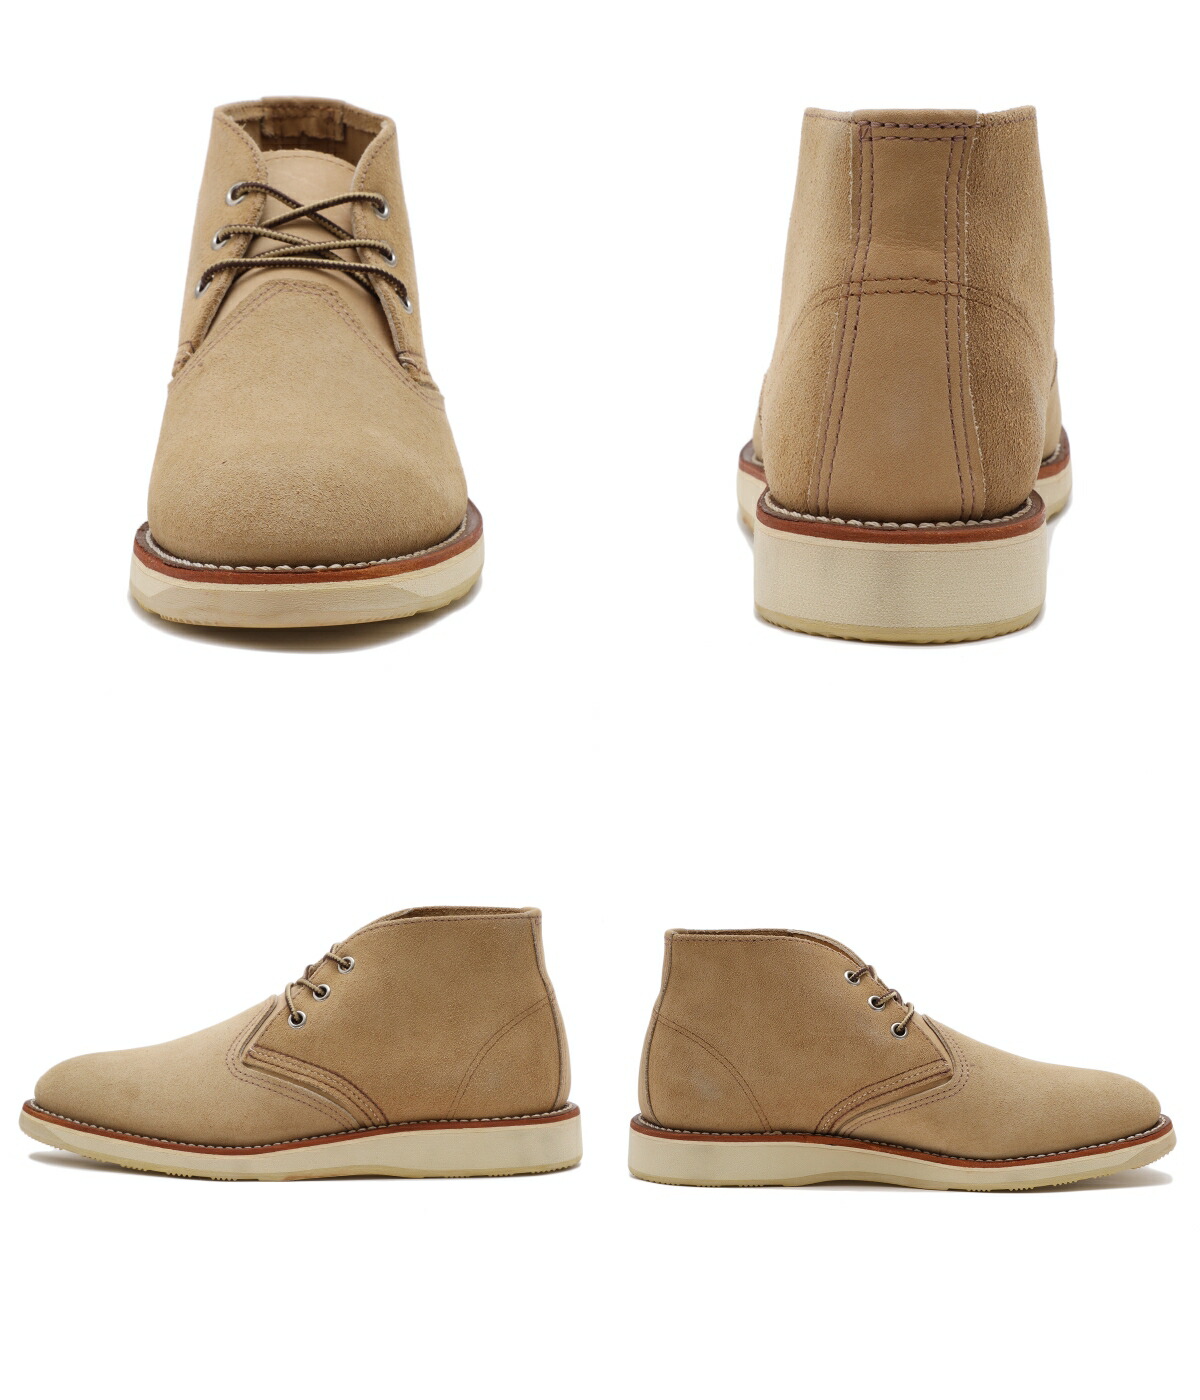 RED WING / レッドウィング ： WORK CHUKKA ： 3143 : 3143 : ARKnets